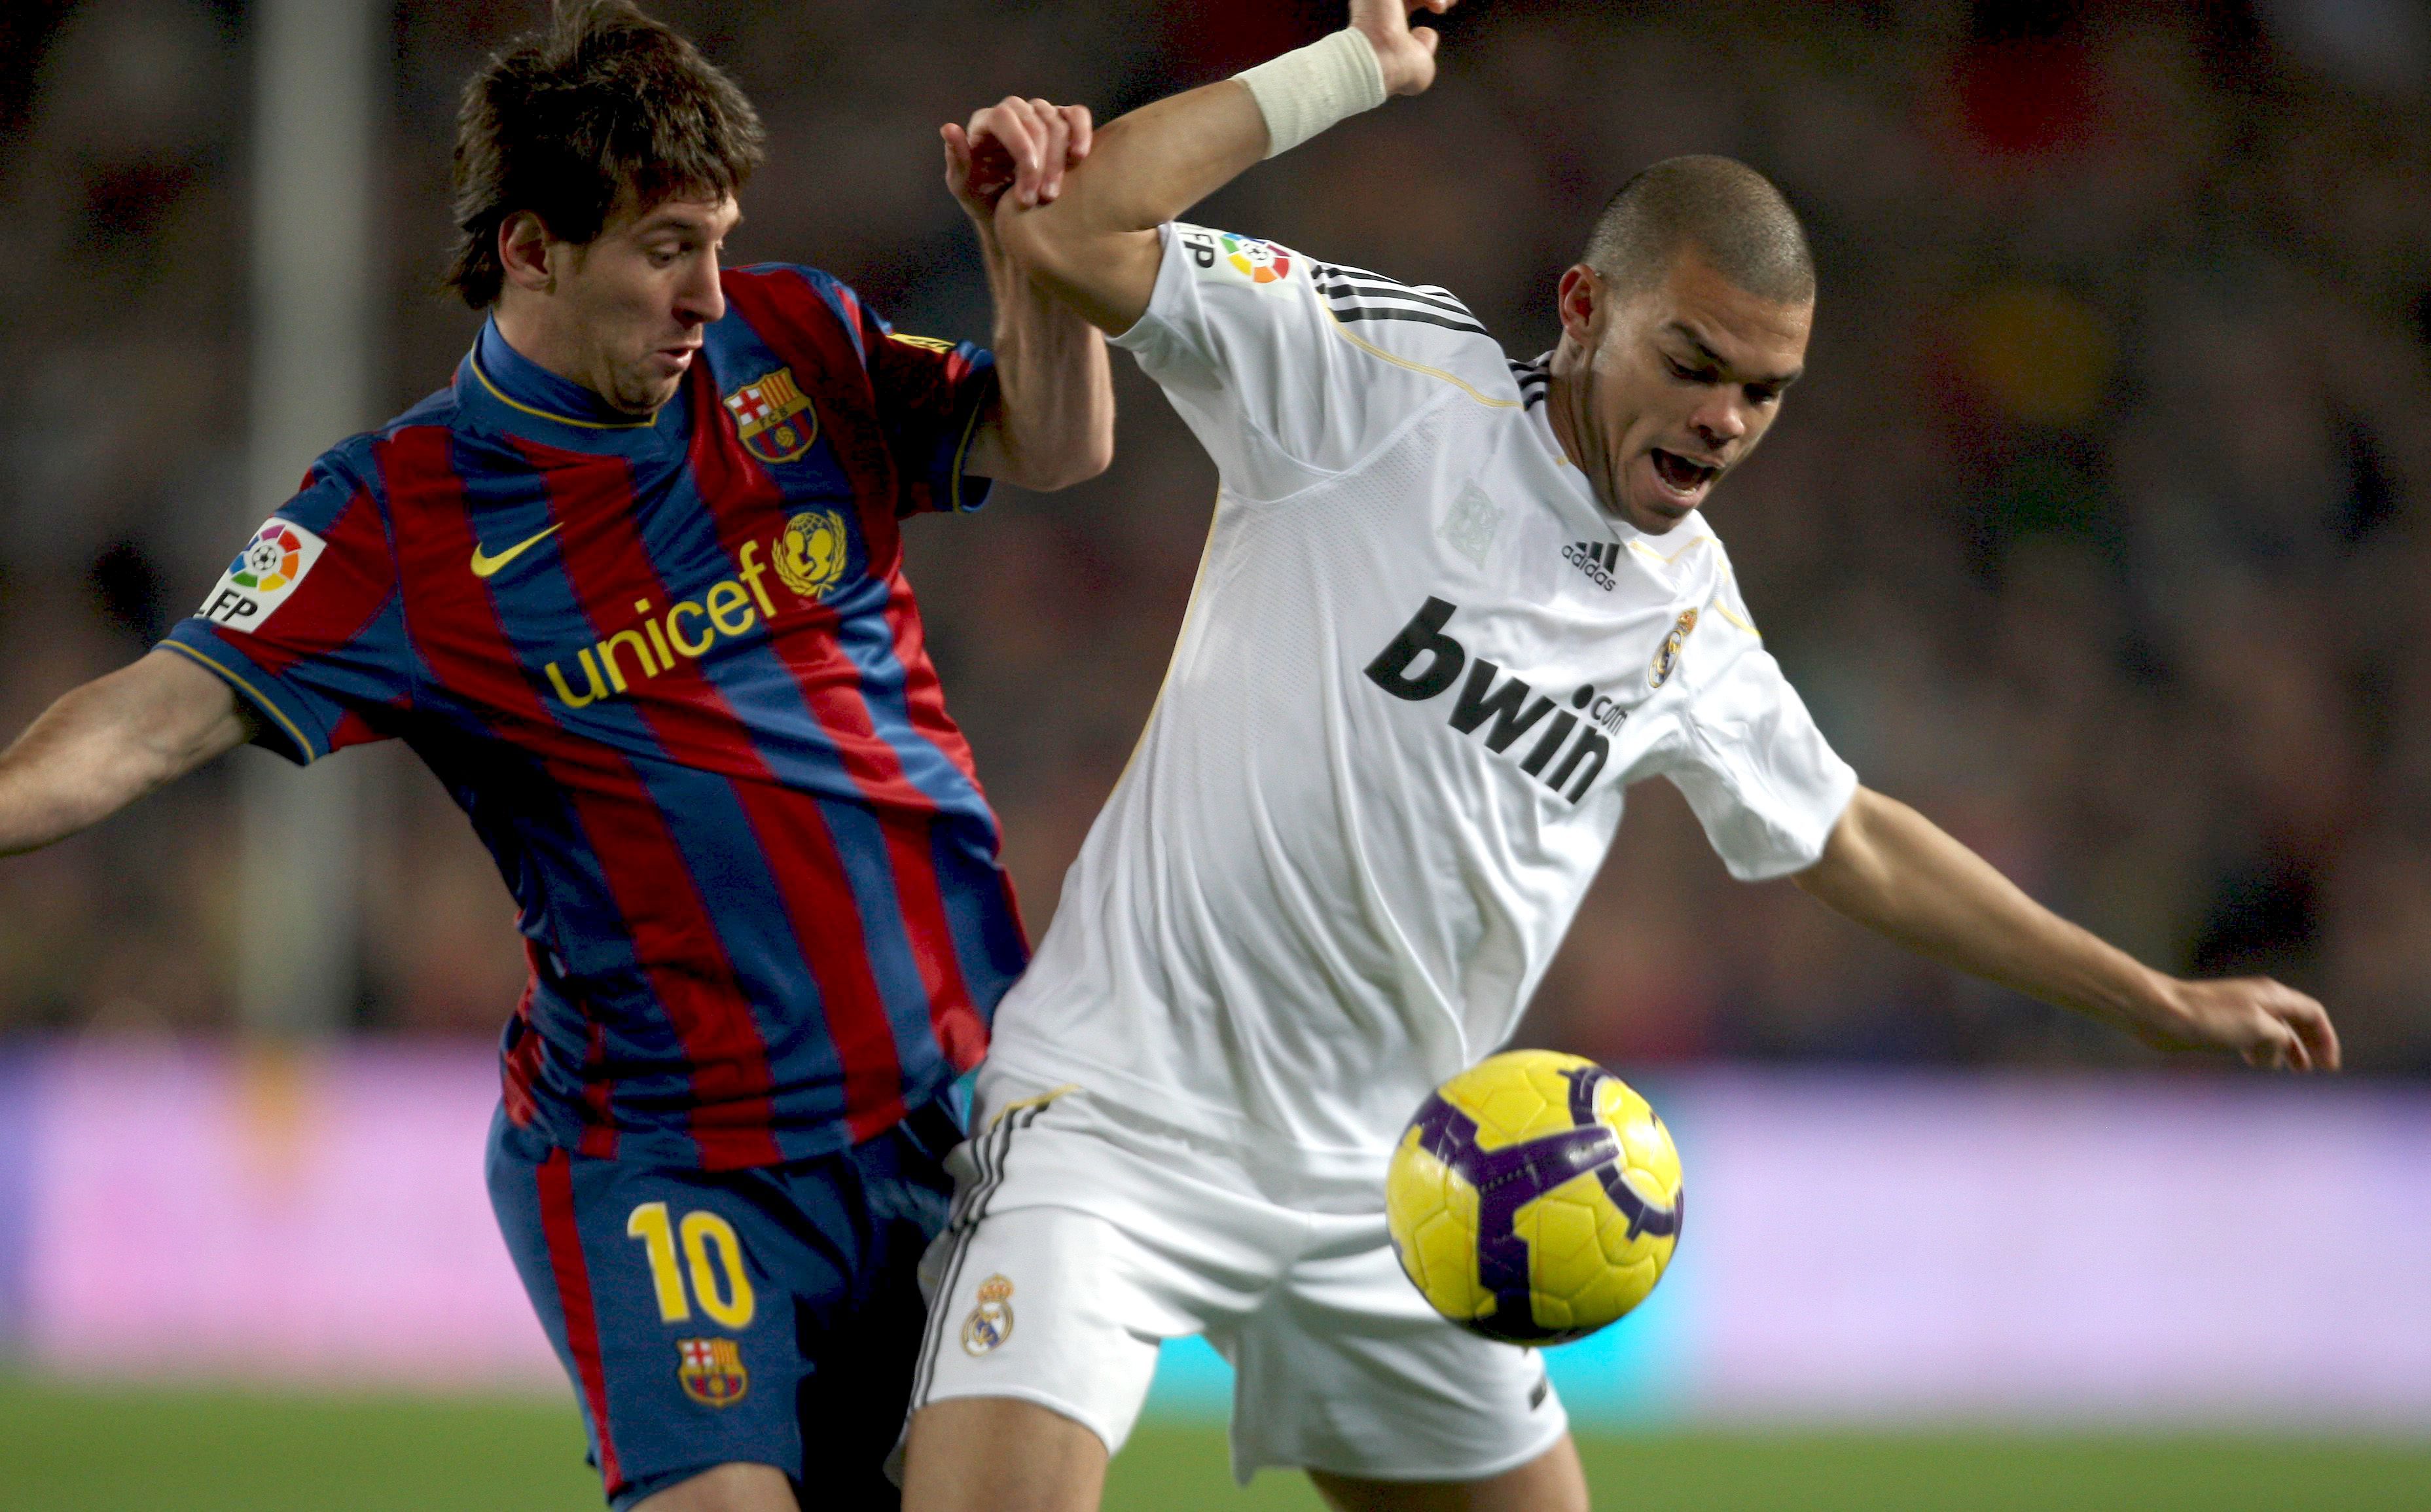 Real Madrid Pepe is fighting for the ball Desktop wallpaper 1400x1050